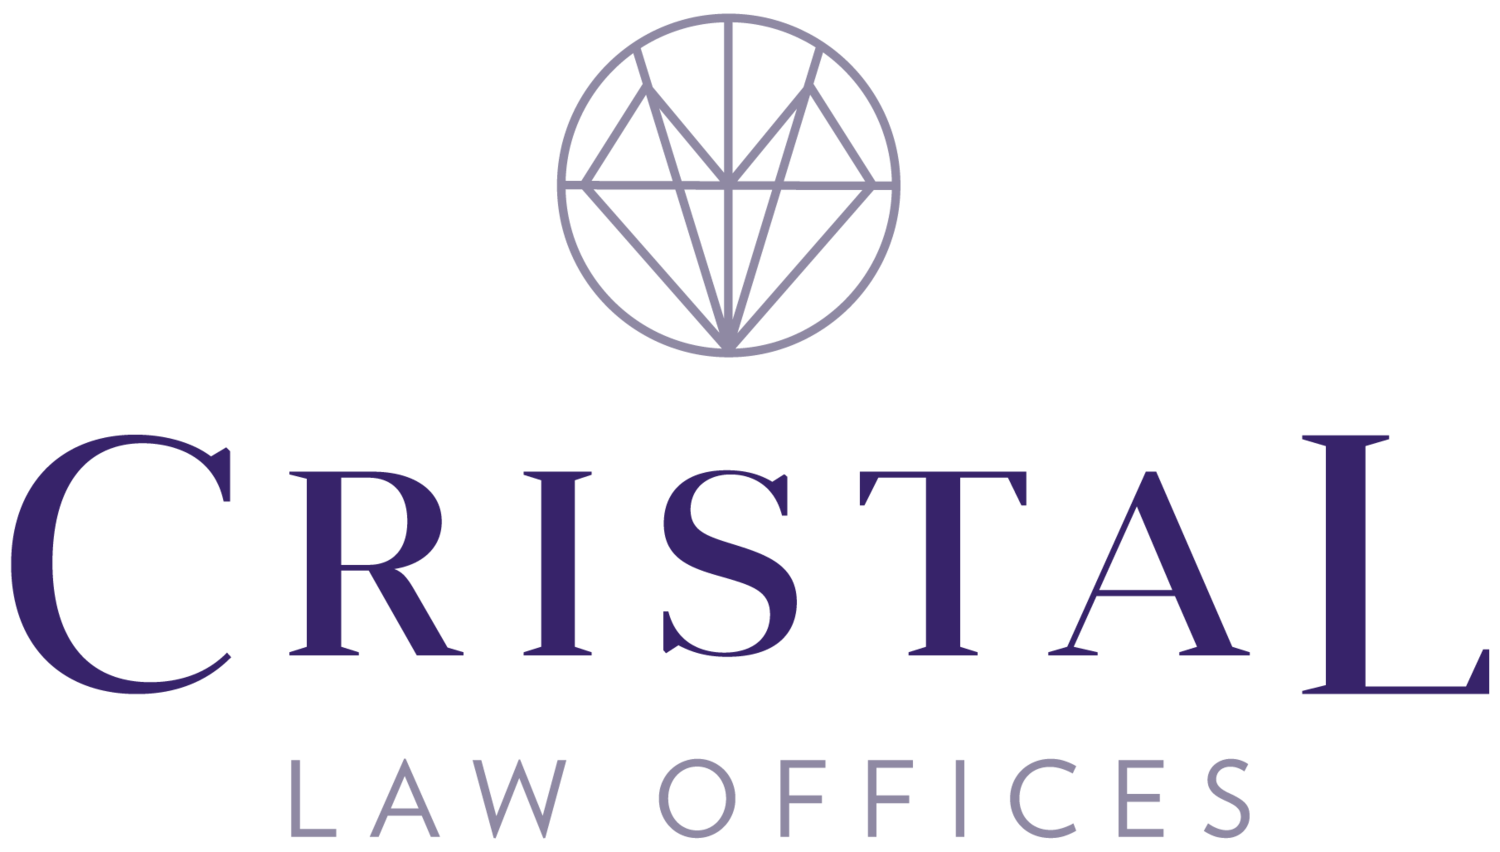 Cristal Law Offices